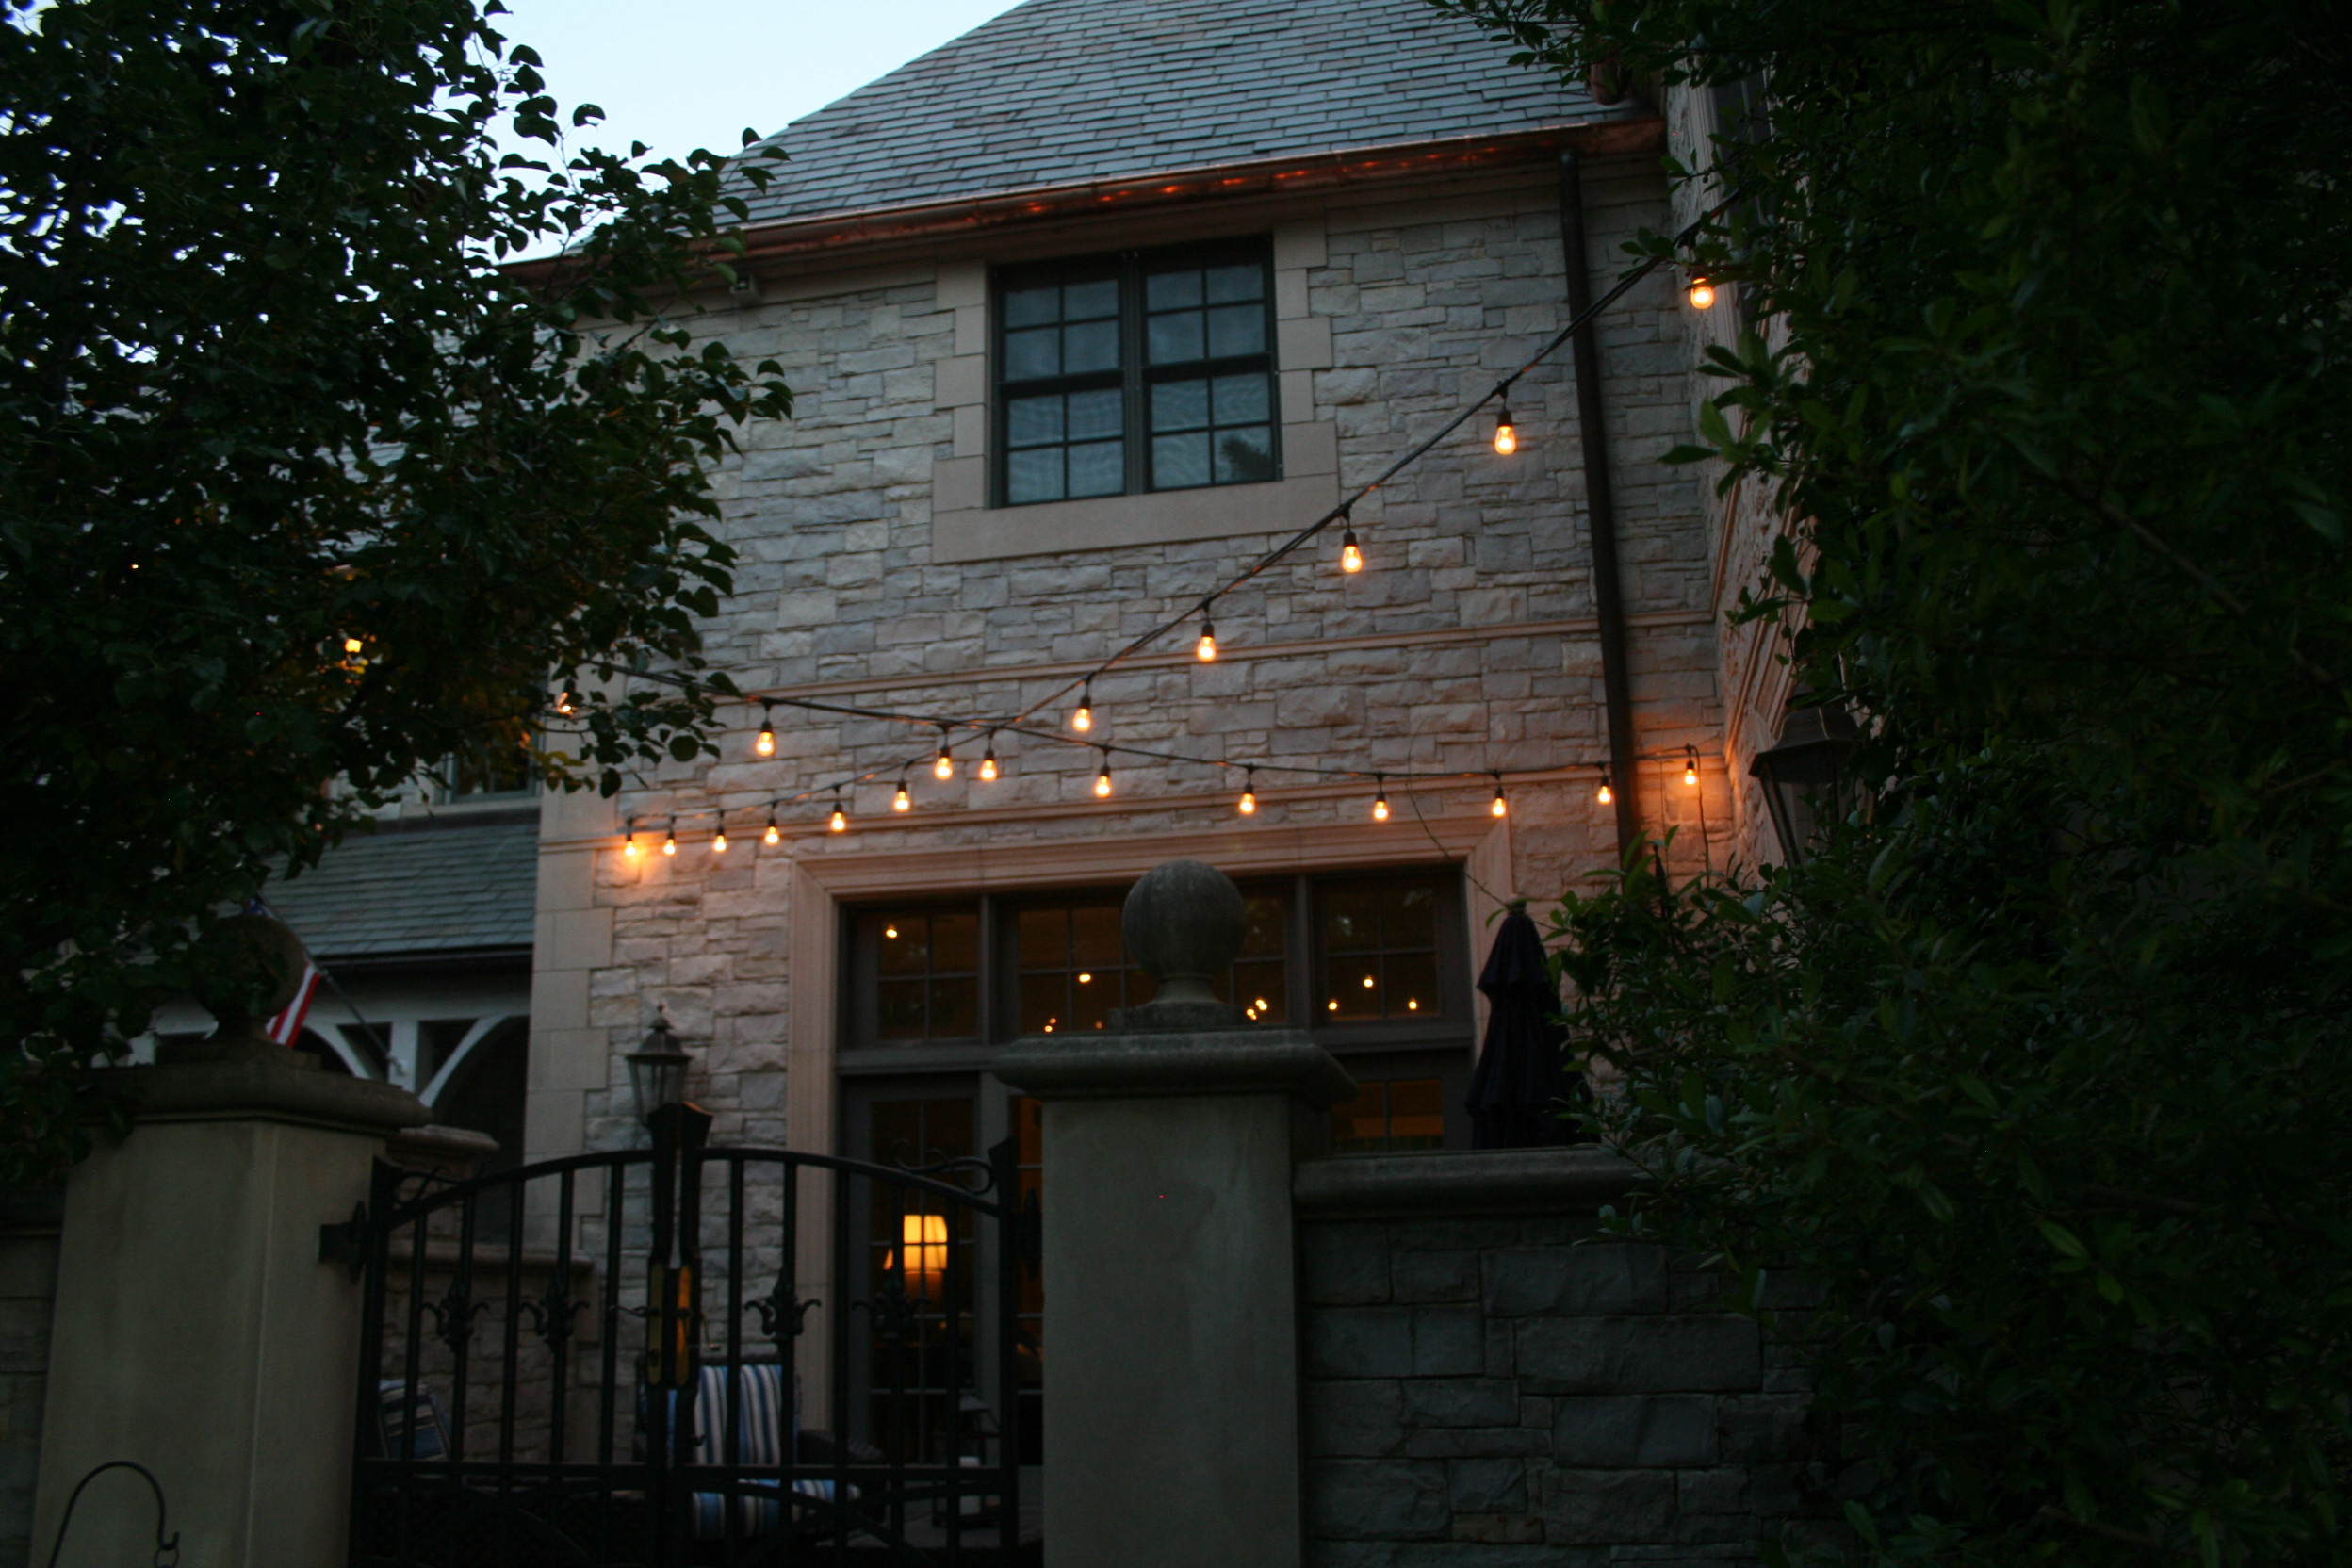 Exterior building with string lighting